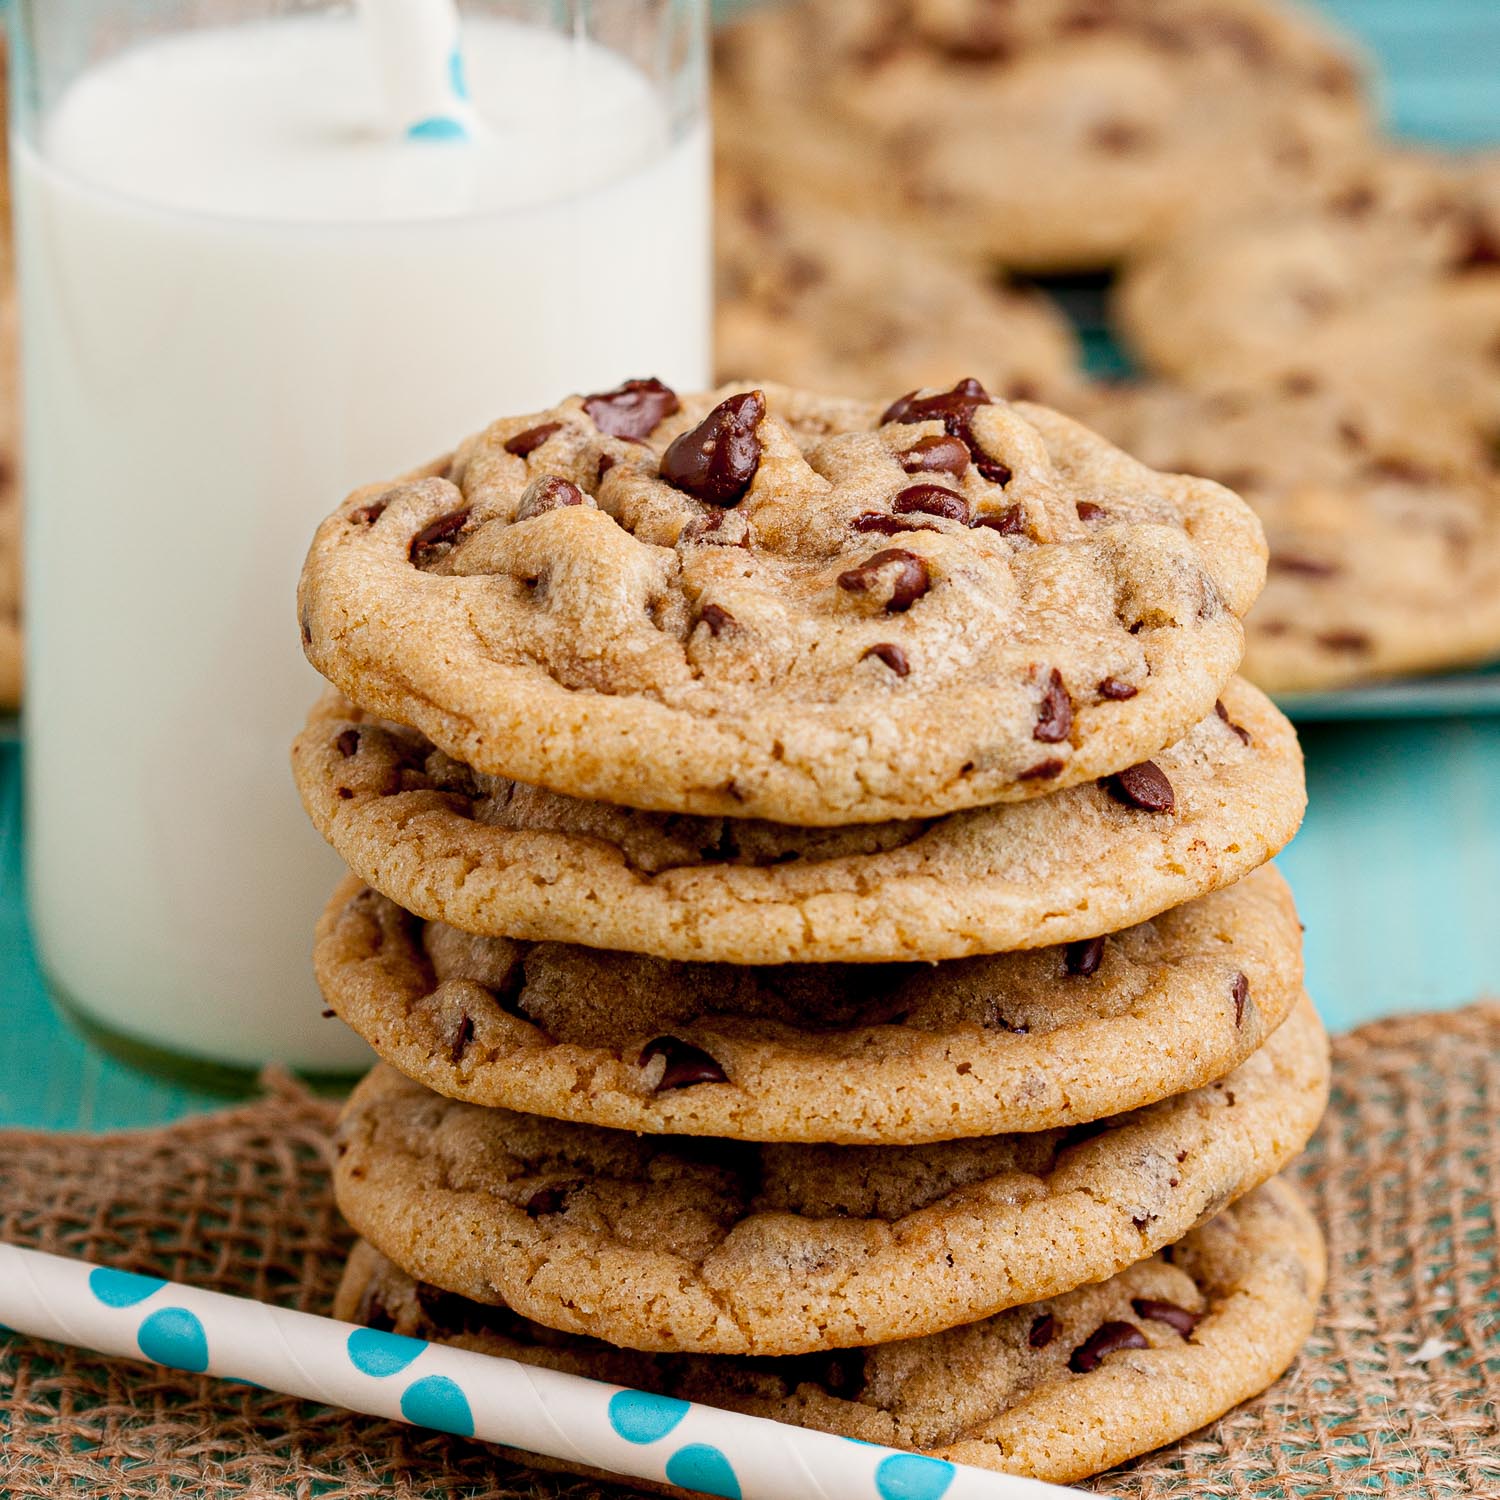 https://www.chewoutloud.com/wp-content/uploads/2022/10/Bakery-Style-Chocolate-Chip-Cookies-Square.jpg